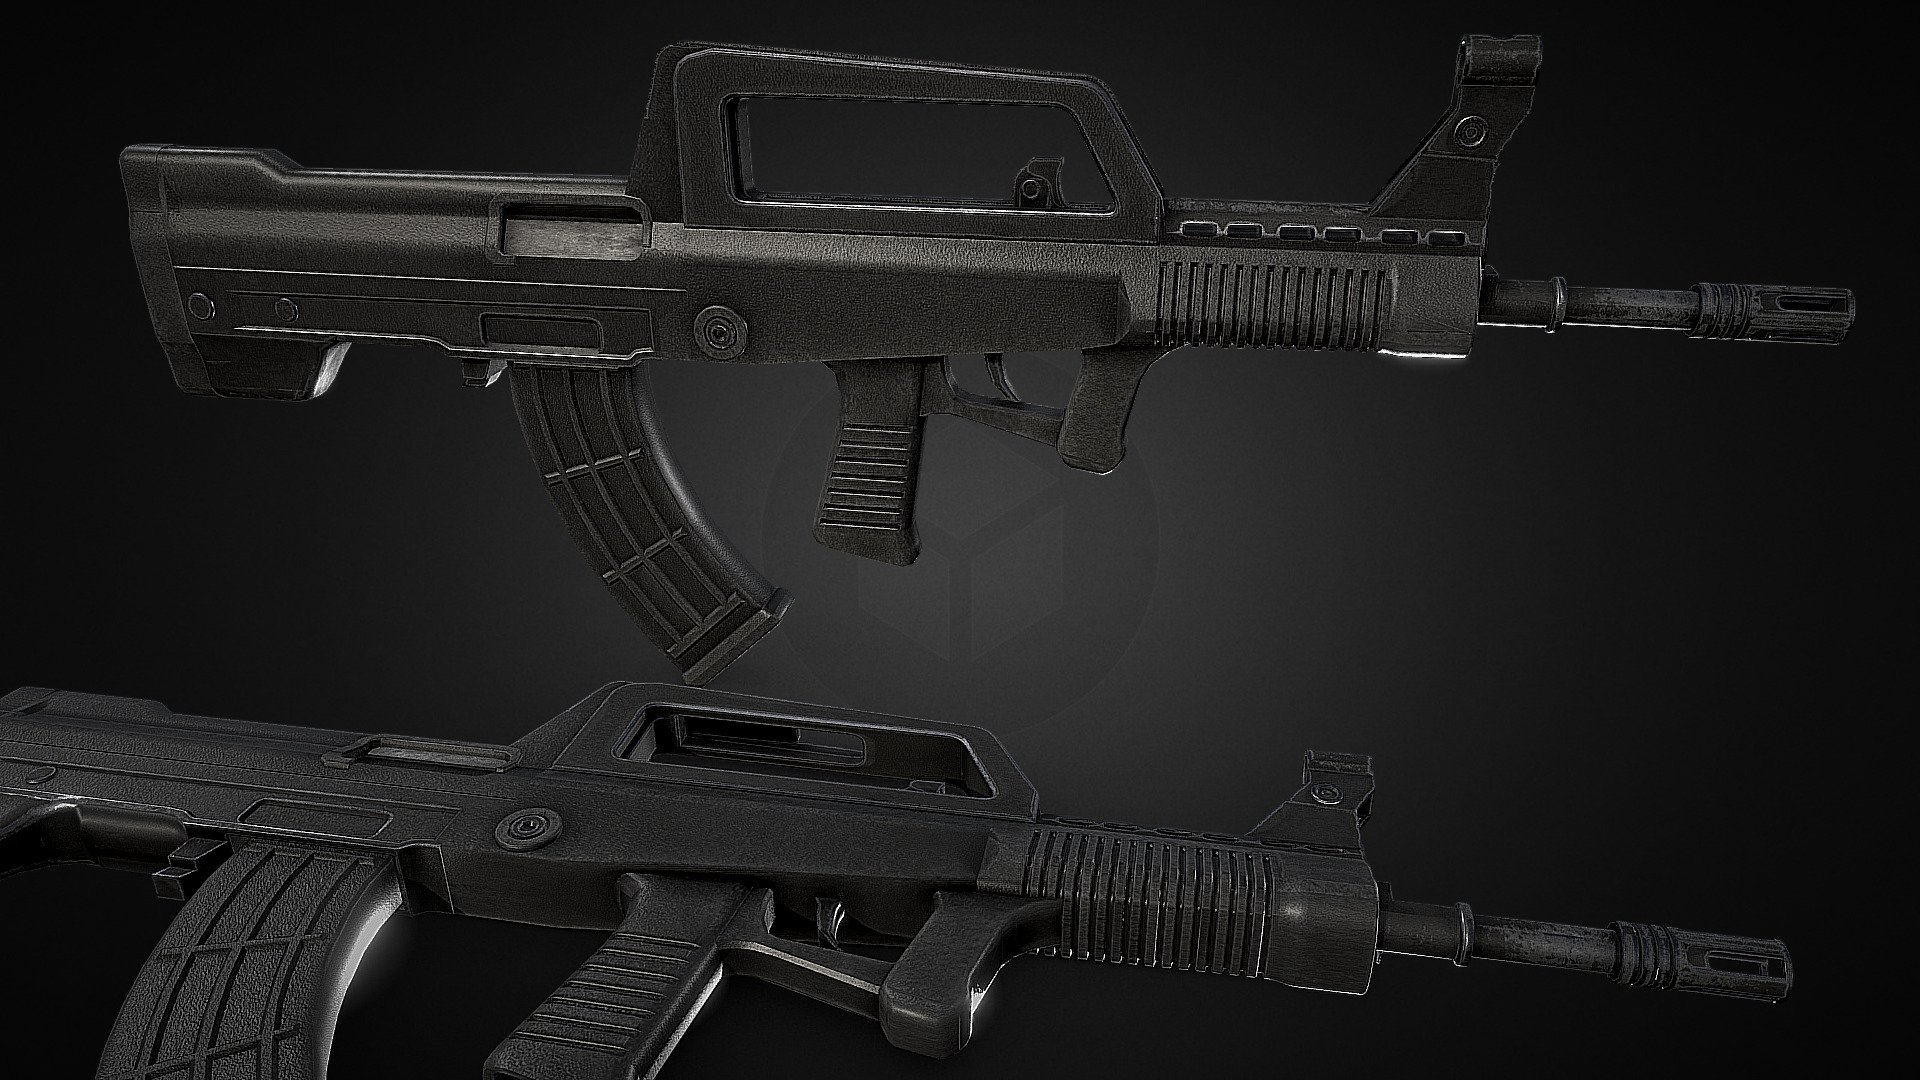 Features: 




4K Textures,Jpeg 12/12 Compression

Standard Magazine

FBX and Blender Files

Textures:




Normal

Rough

Metal

Diffuse

I made this 3d weapon model for any artist who wants a cool gun for their character renders, game or to reskin. Its an affordable price and you get extra features like accessories. The download comes with a thank you message attached to it and features hd textures in high quality PNG and detailed models in blender and fbx format 3d model